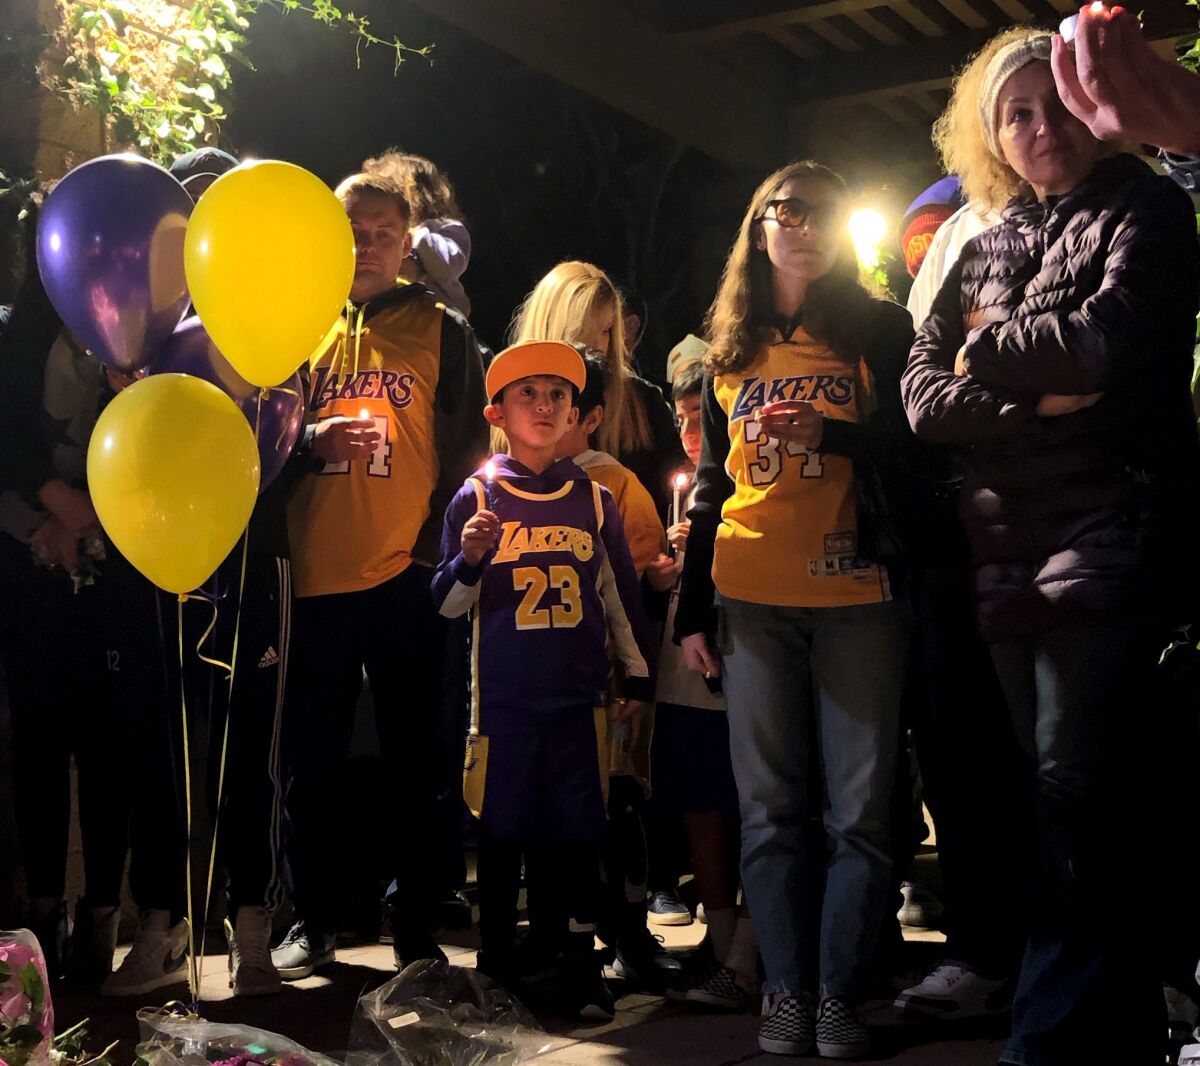 "He was always so kind and always so loving to the children more than anything,” Newport Beach resident Kim Shipman said at a candlelight vigil for late Lakers legend Kobe Bryant on Sunday night at Newport Ridge Community Park.